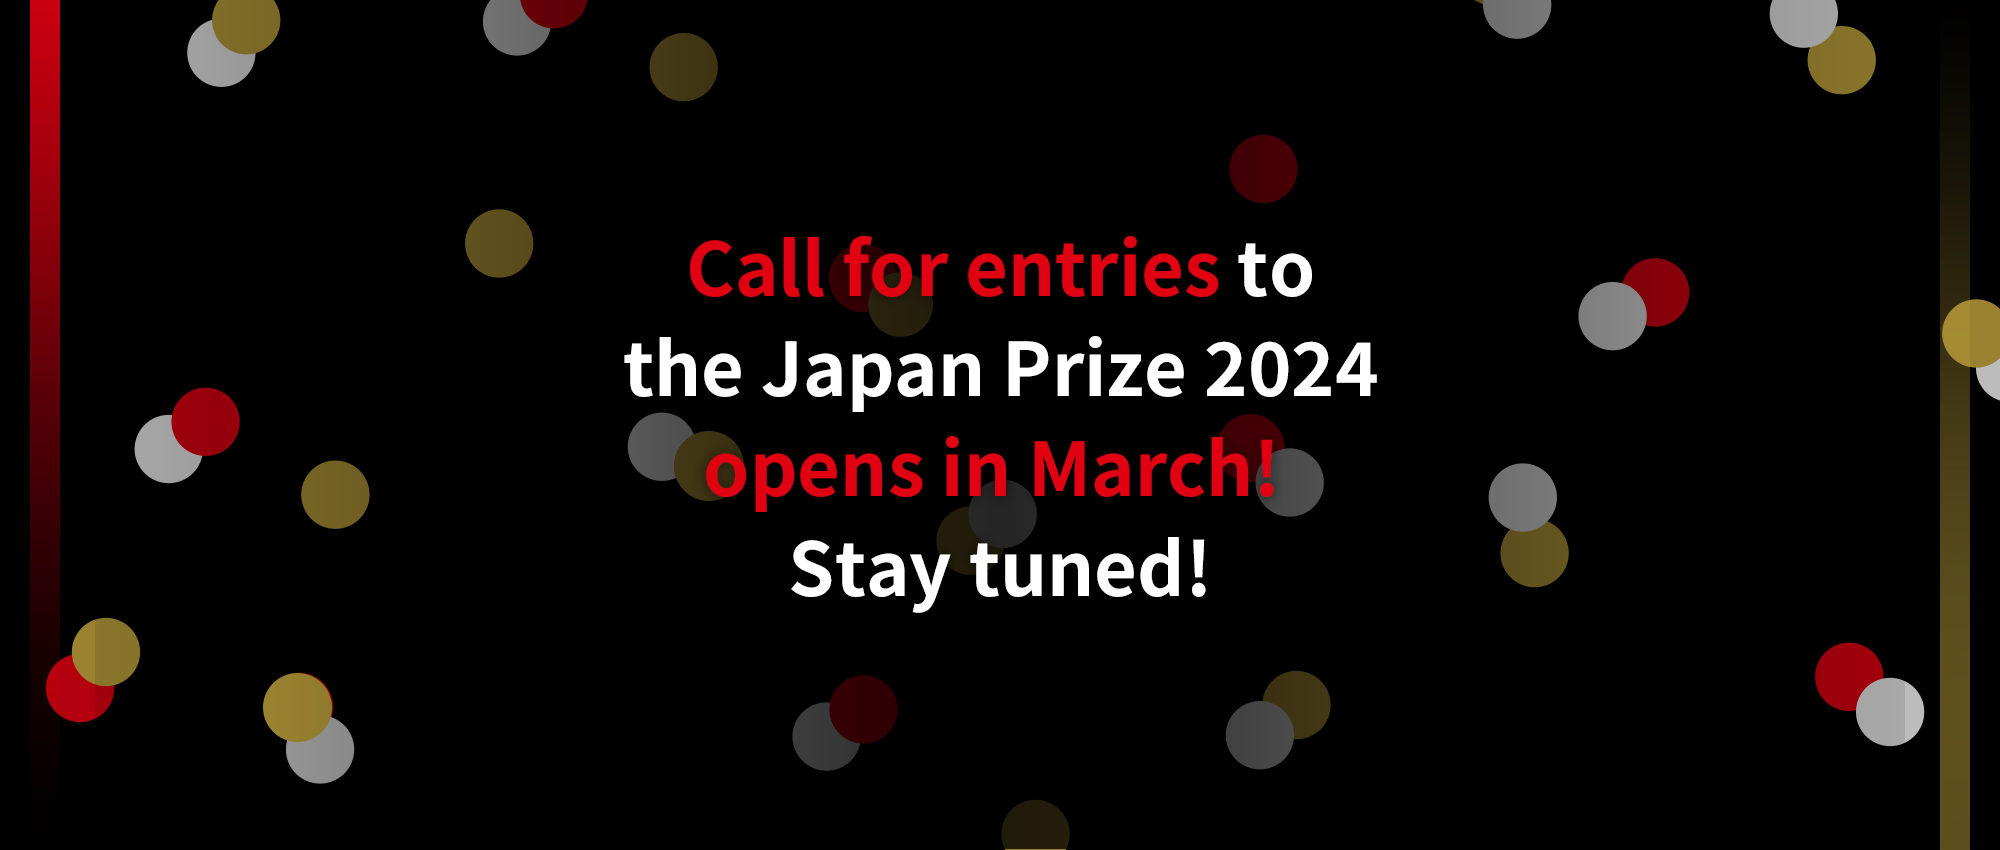 Call for entries to the Japan Prize 2024 opens in March! Stay tuned!